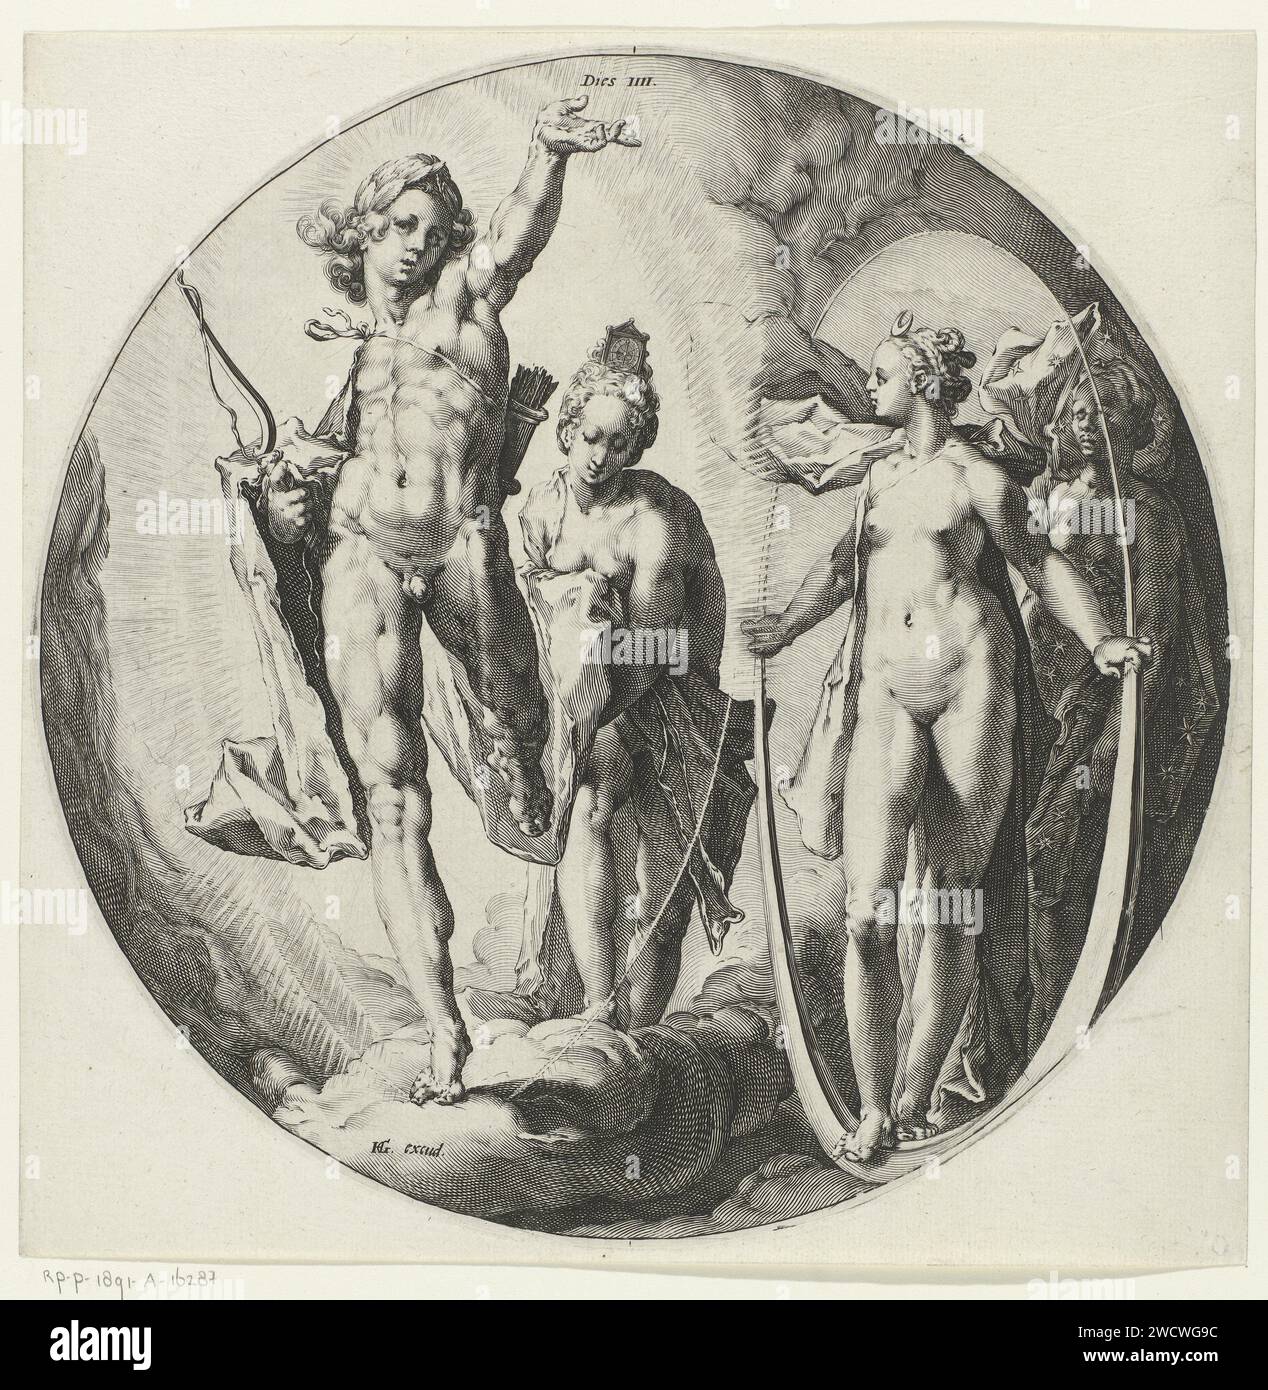 Fourth day of creation: creation of sun, moon and stars, Jan Harmensz. Muller, after Hendrick Goltzius, 1589 print The fourth day of creation, on which the sun and the moon were created and divorce was applied between day and night. The sun is depicted by Apollo as a sun god with bow and arrow case. The time, with a clock on her head, holds his cloak. On the right the moon, like the moon goddess Diana. Behind her a black woman with star mantle as a personification of the stars. To the Bible text in Gen. 1: 14-19. print maker: Amsterdampublisher: Haarlem paper engraving creation of sun, moon an Stock Photo